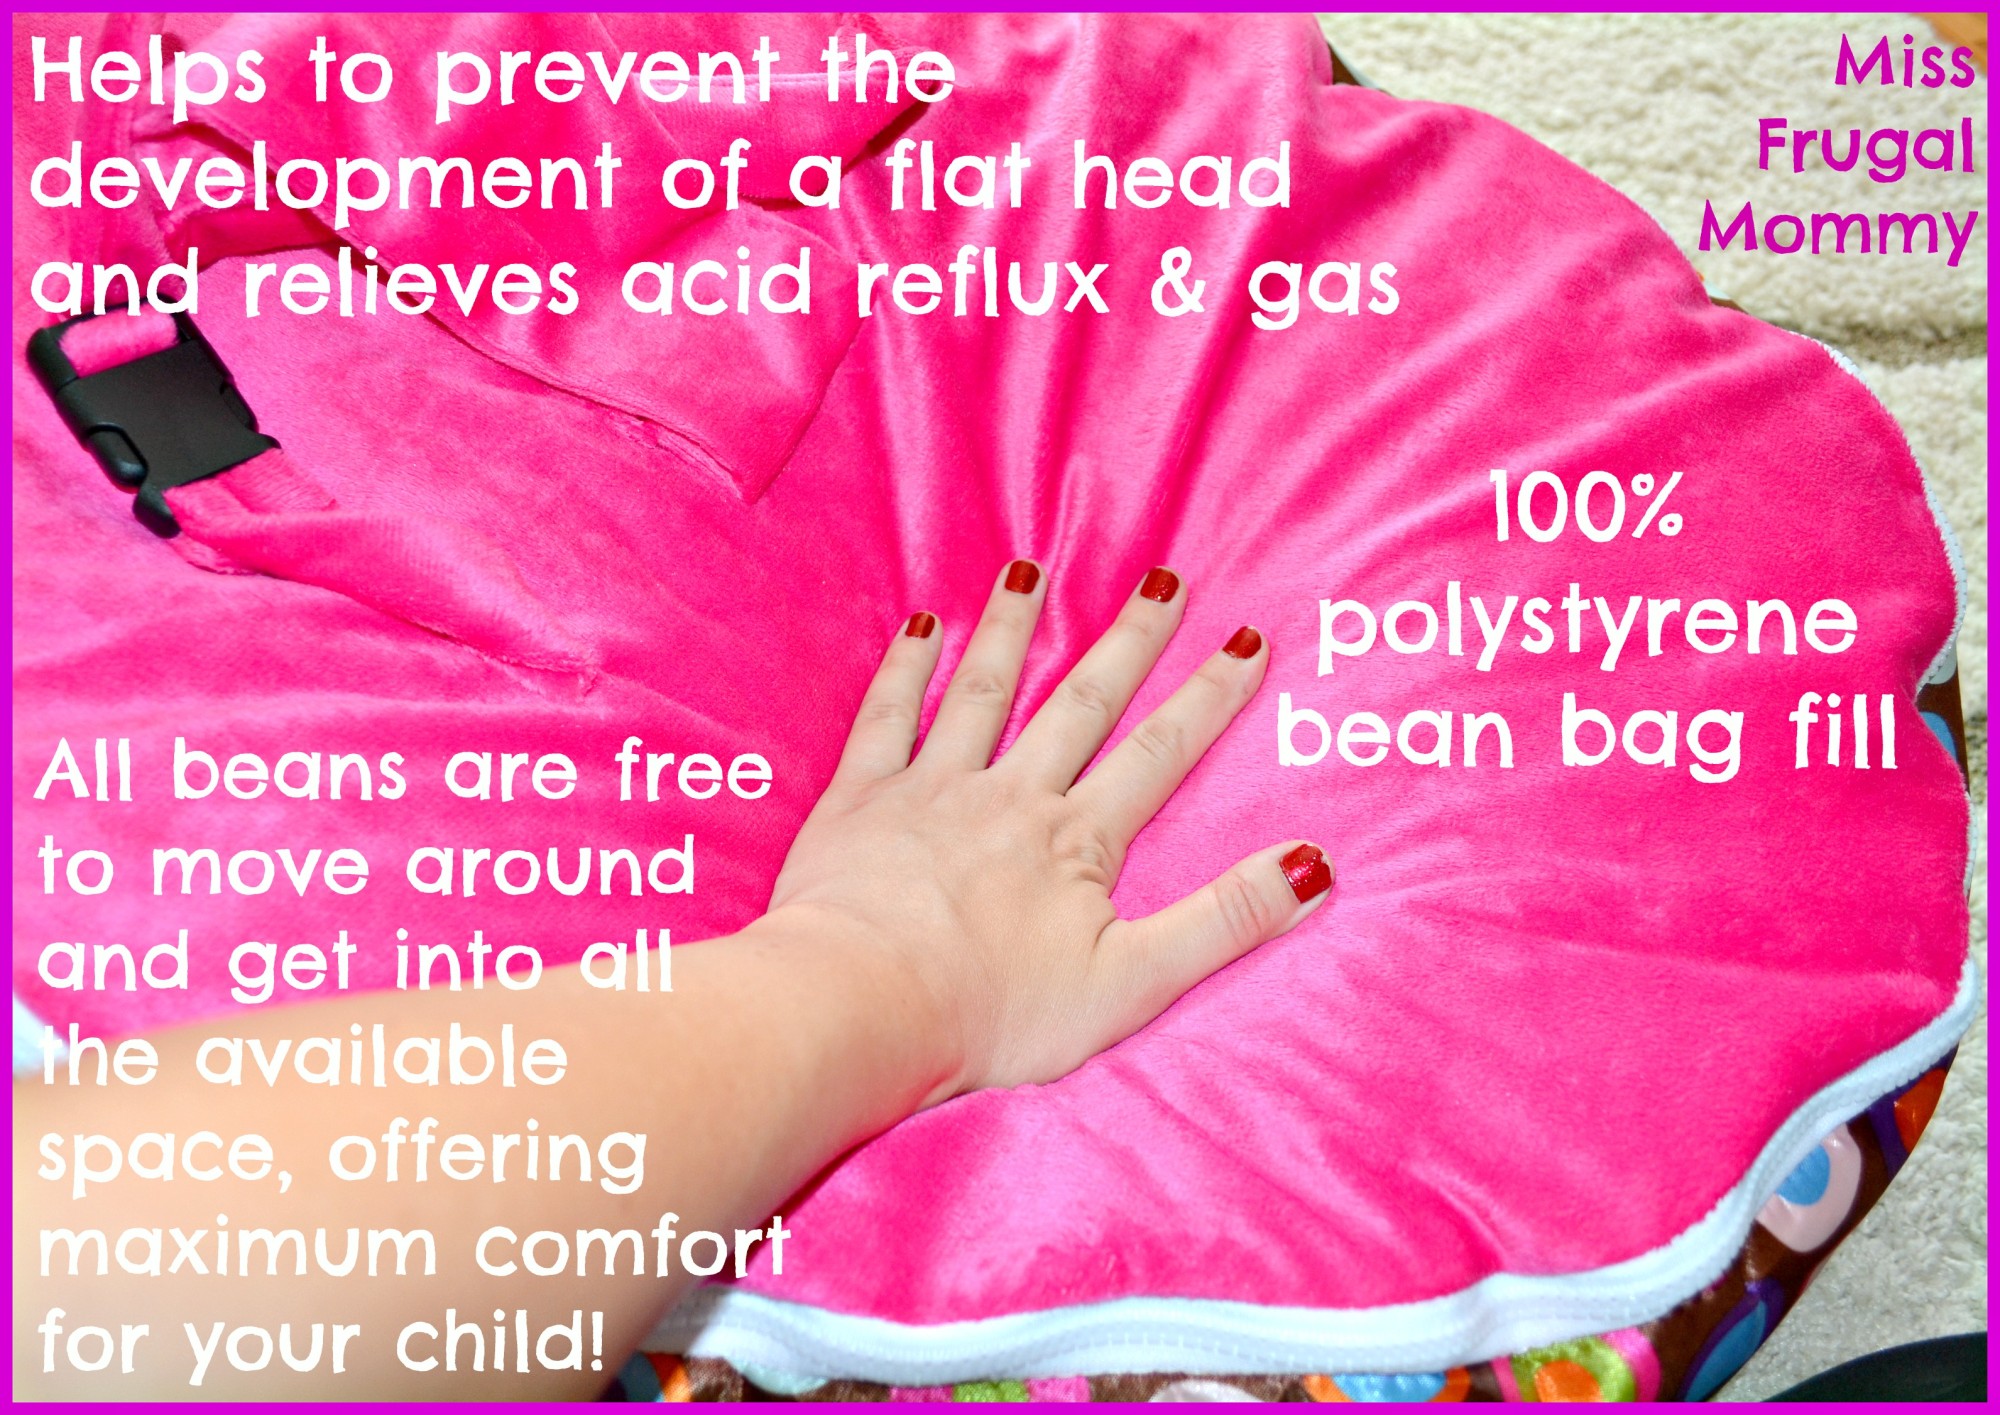 BayB Brand Bean Bag Review (Getting Ready For Baby Gift Guide)